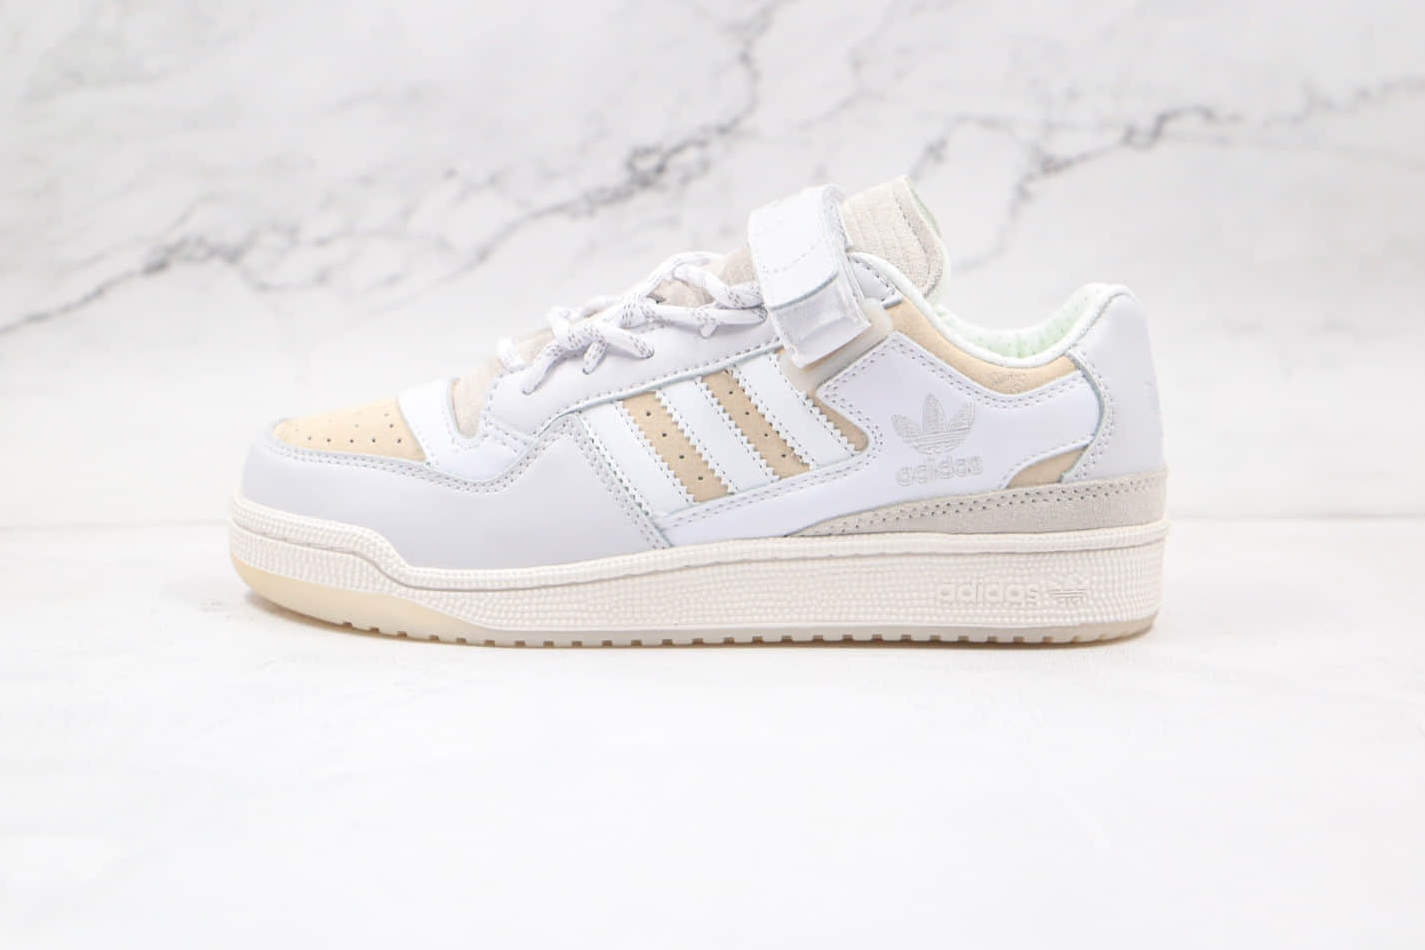 Adidas Ivy Park x Forum Low 'White' FZ4389 - Iconic Collaborative Sneakers